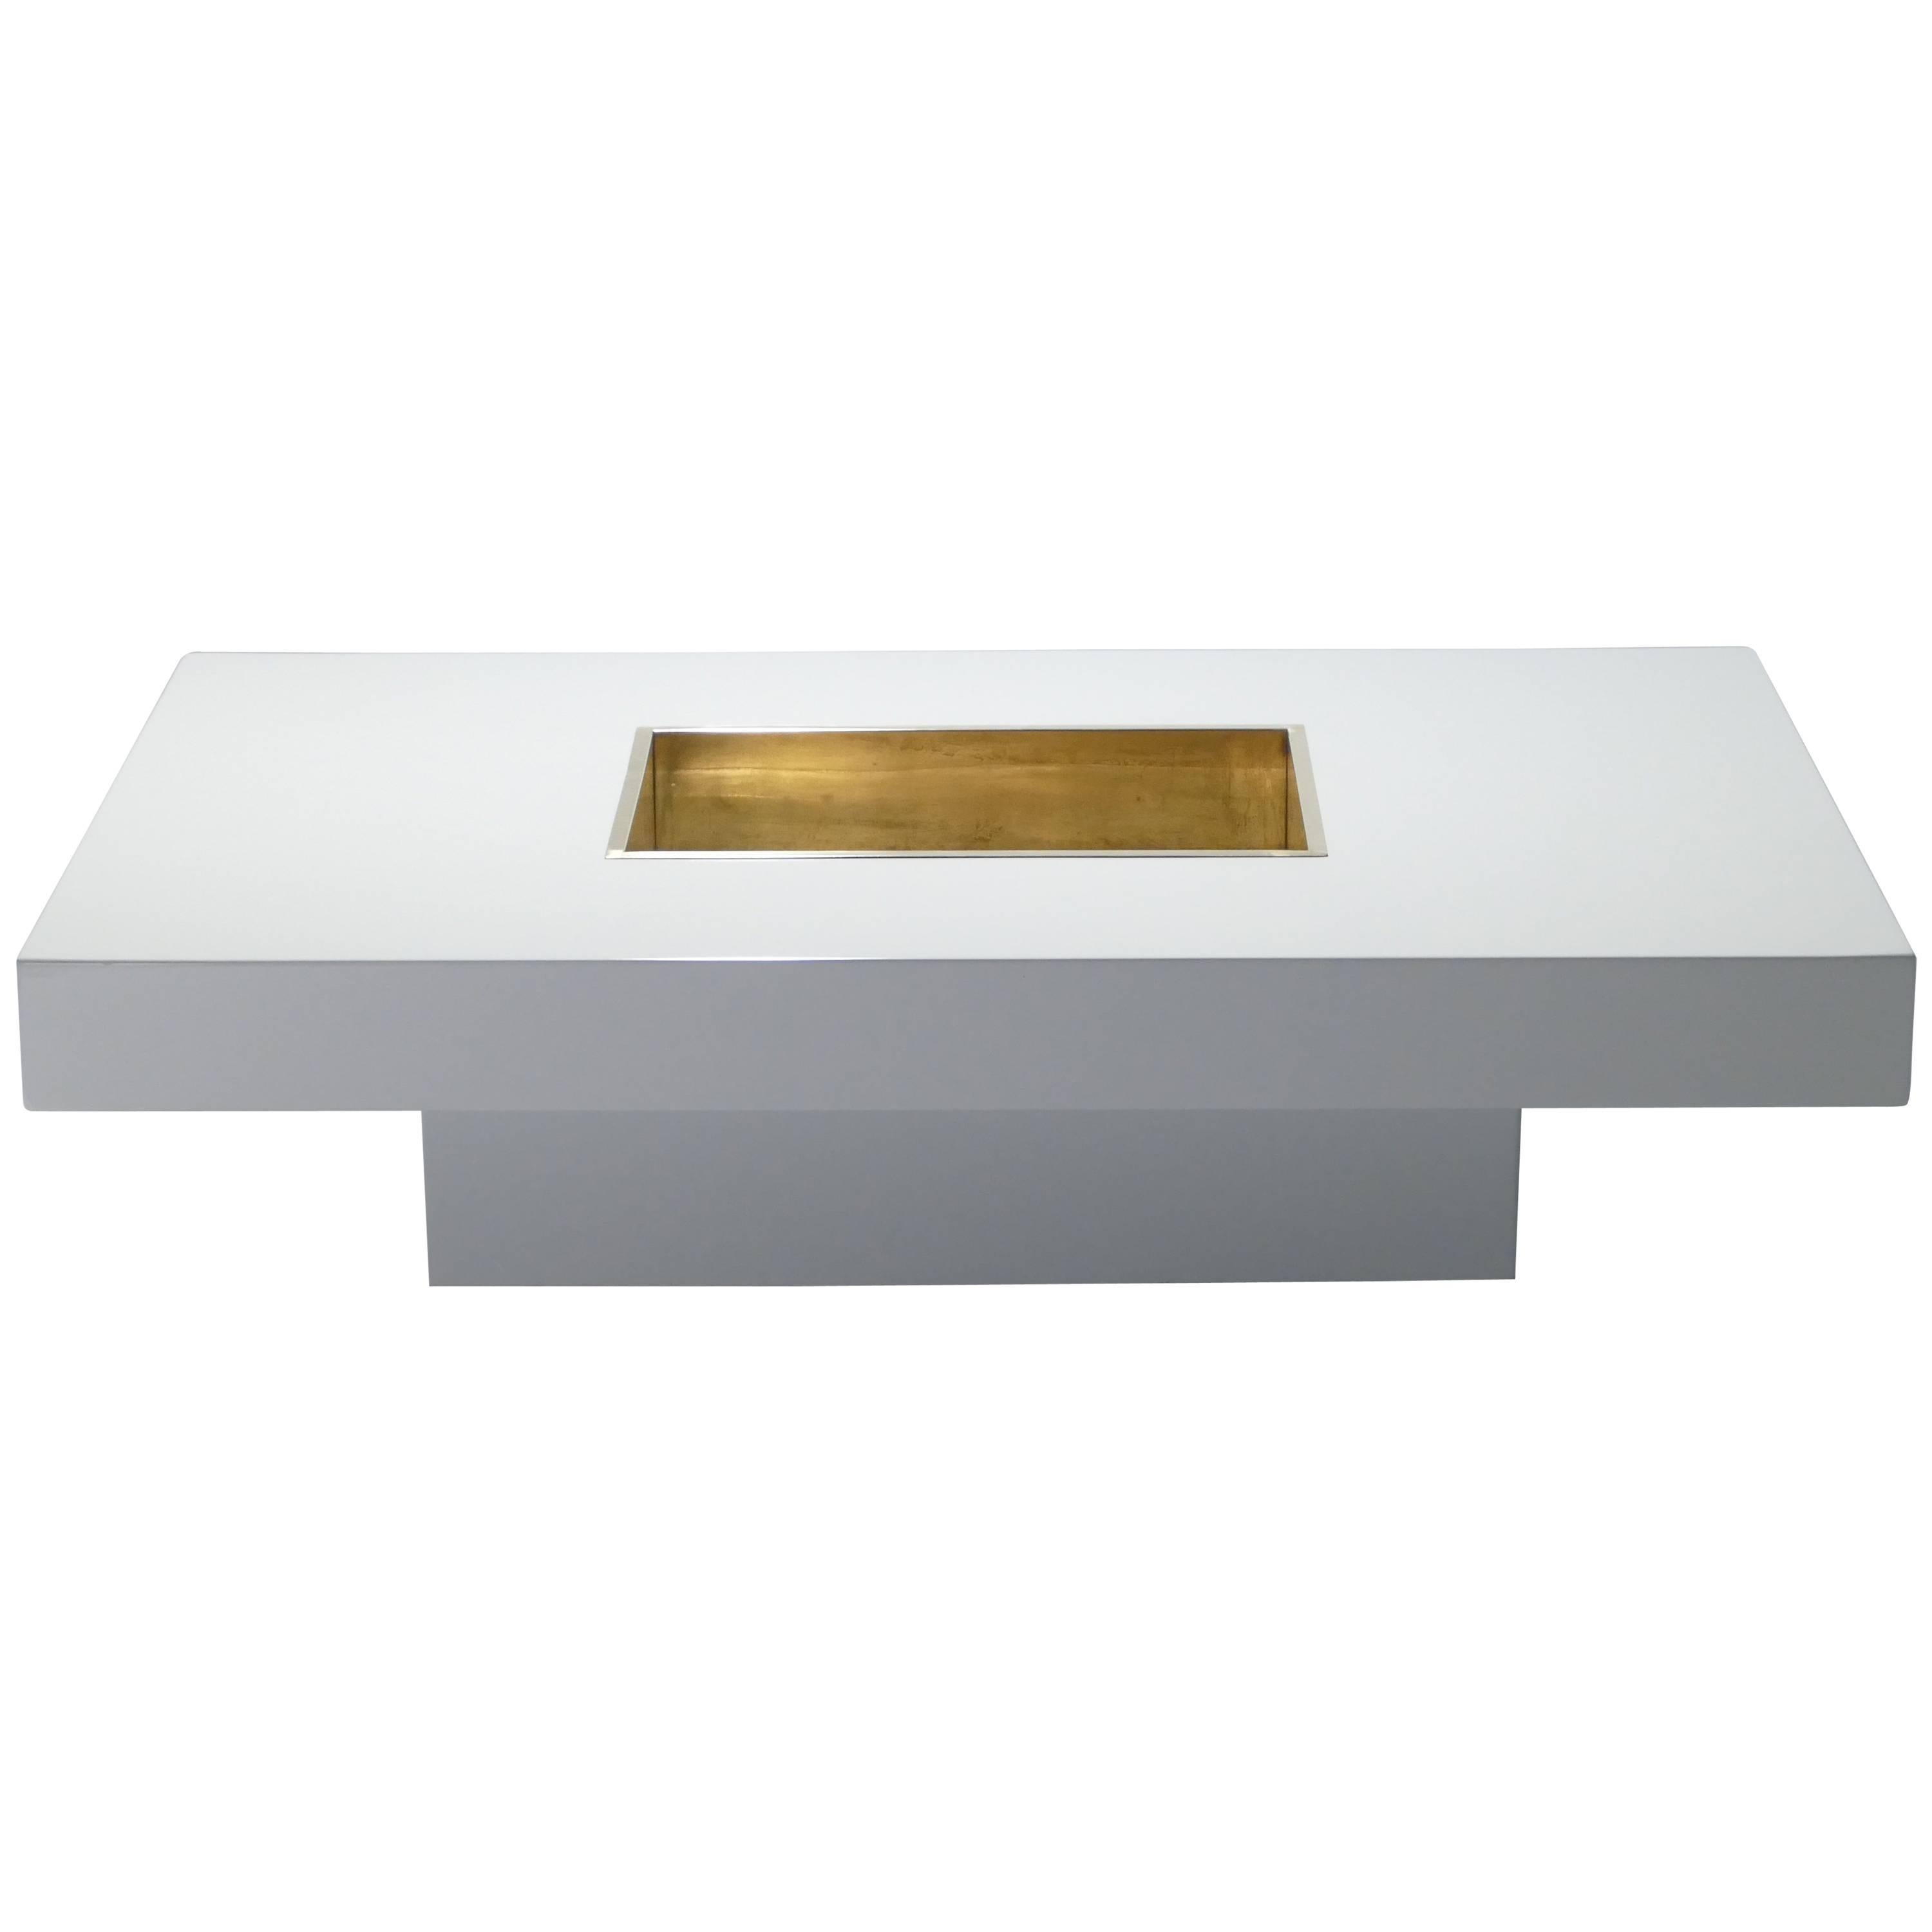 Willy Rizzo White Lacquer Coffee Table, 1970s